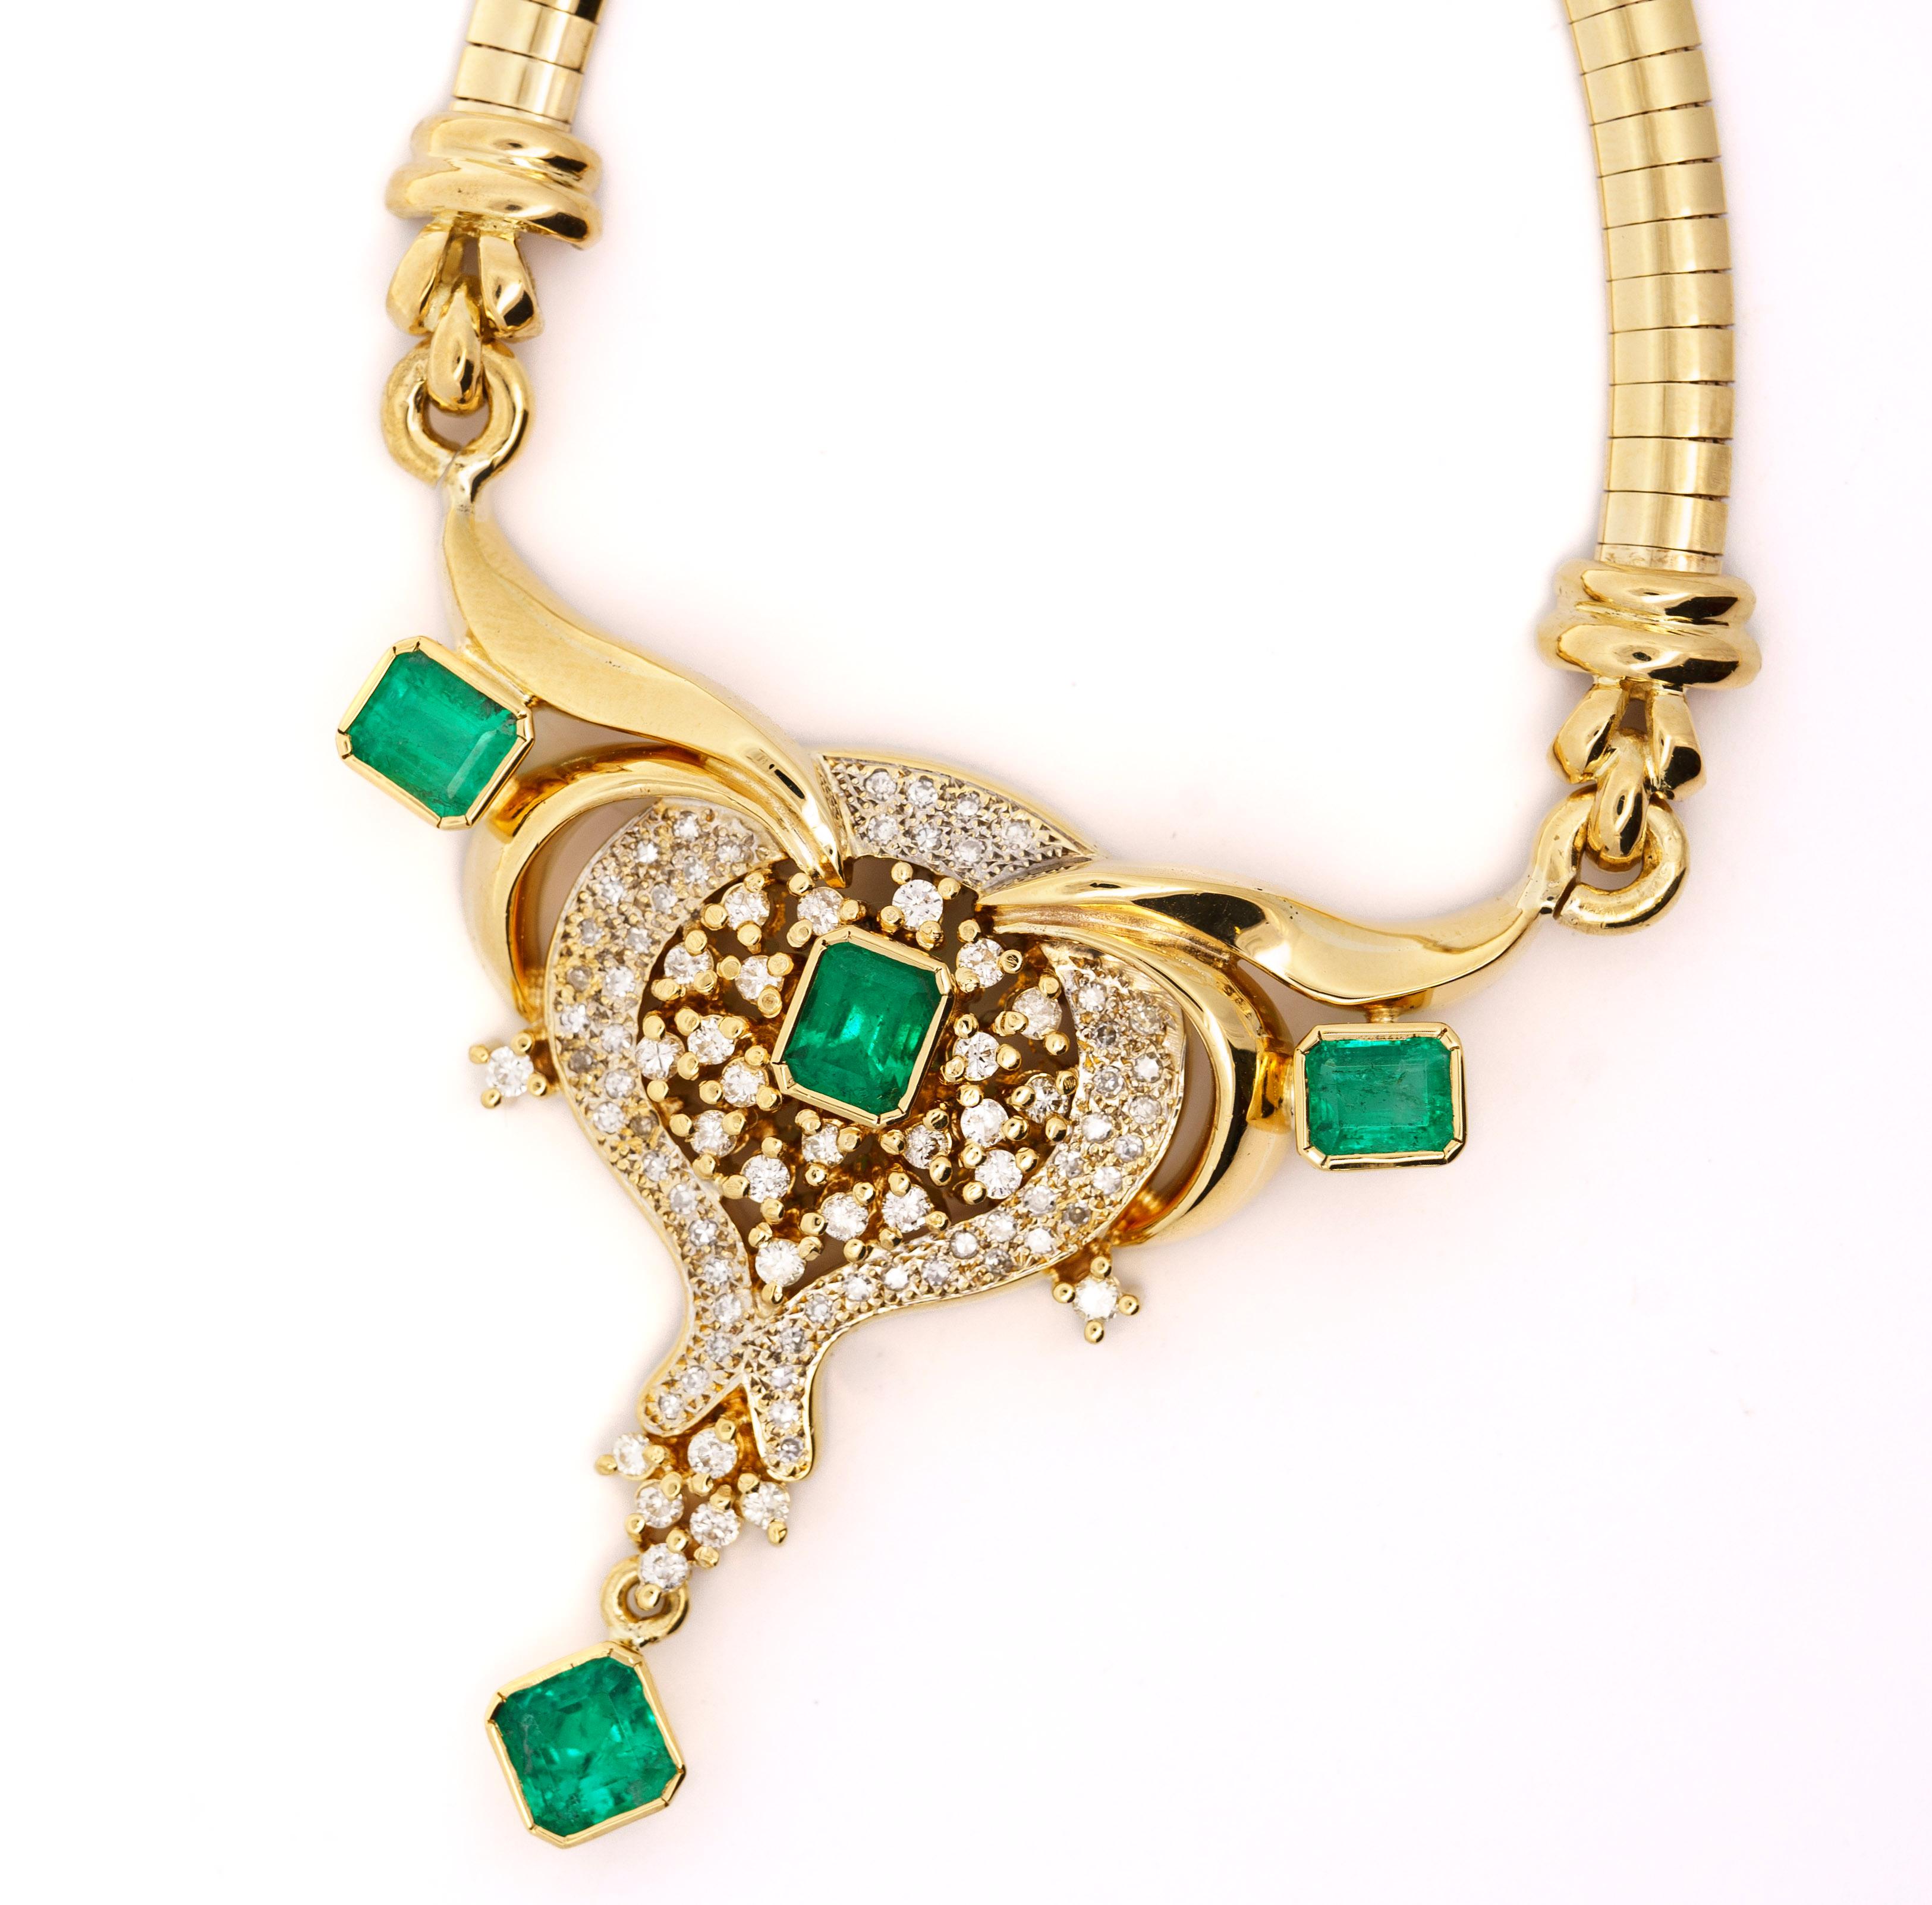 Emerald Cut Vintage 5 Carat Emerald & Diamond Necklace in 14K Yellow Gold For Sale